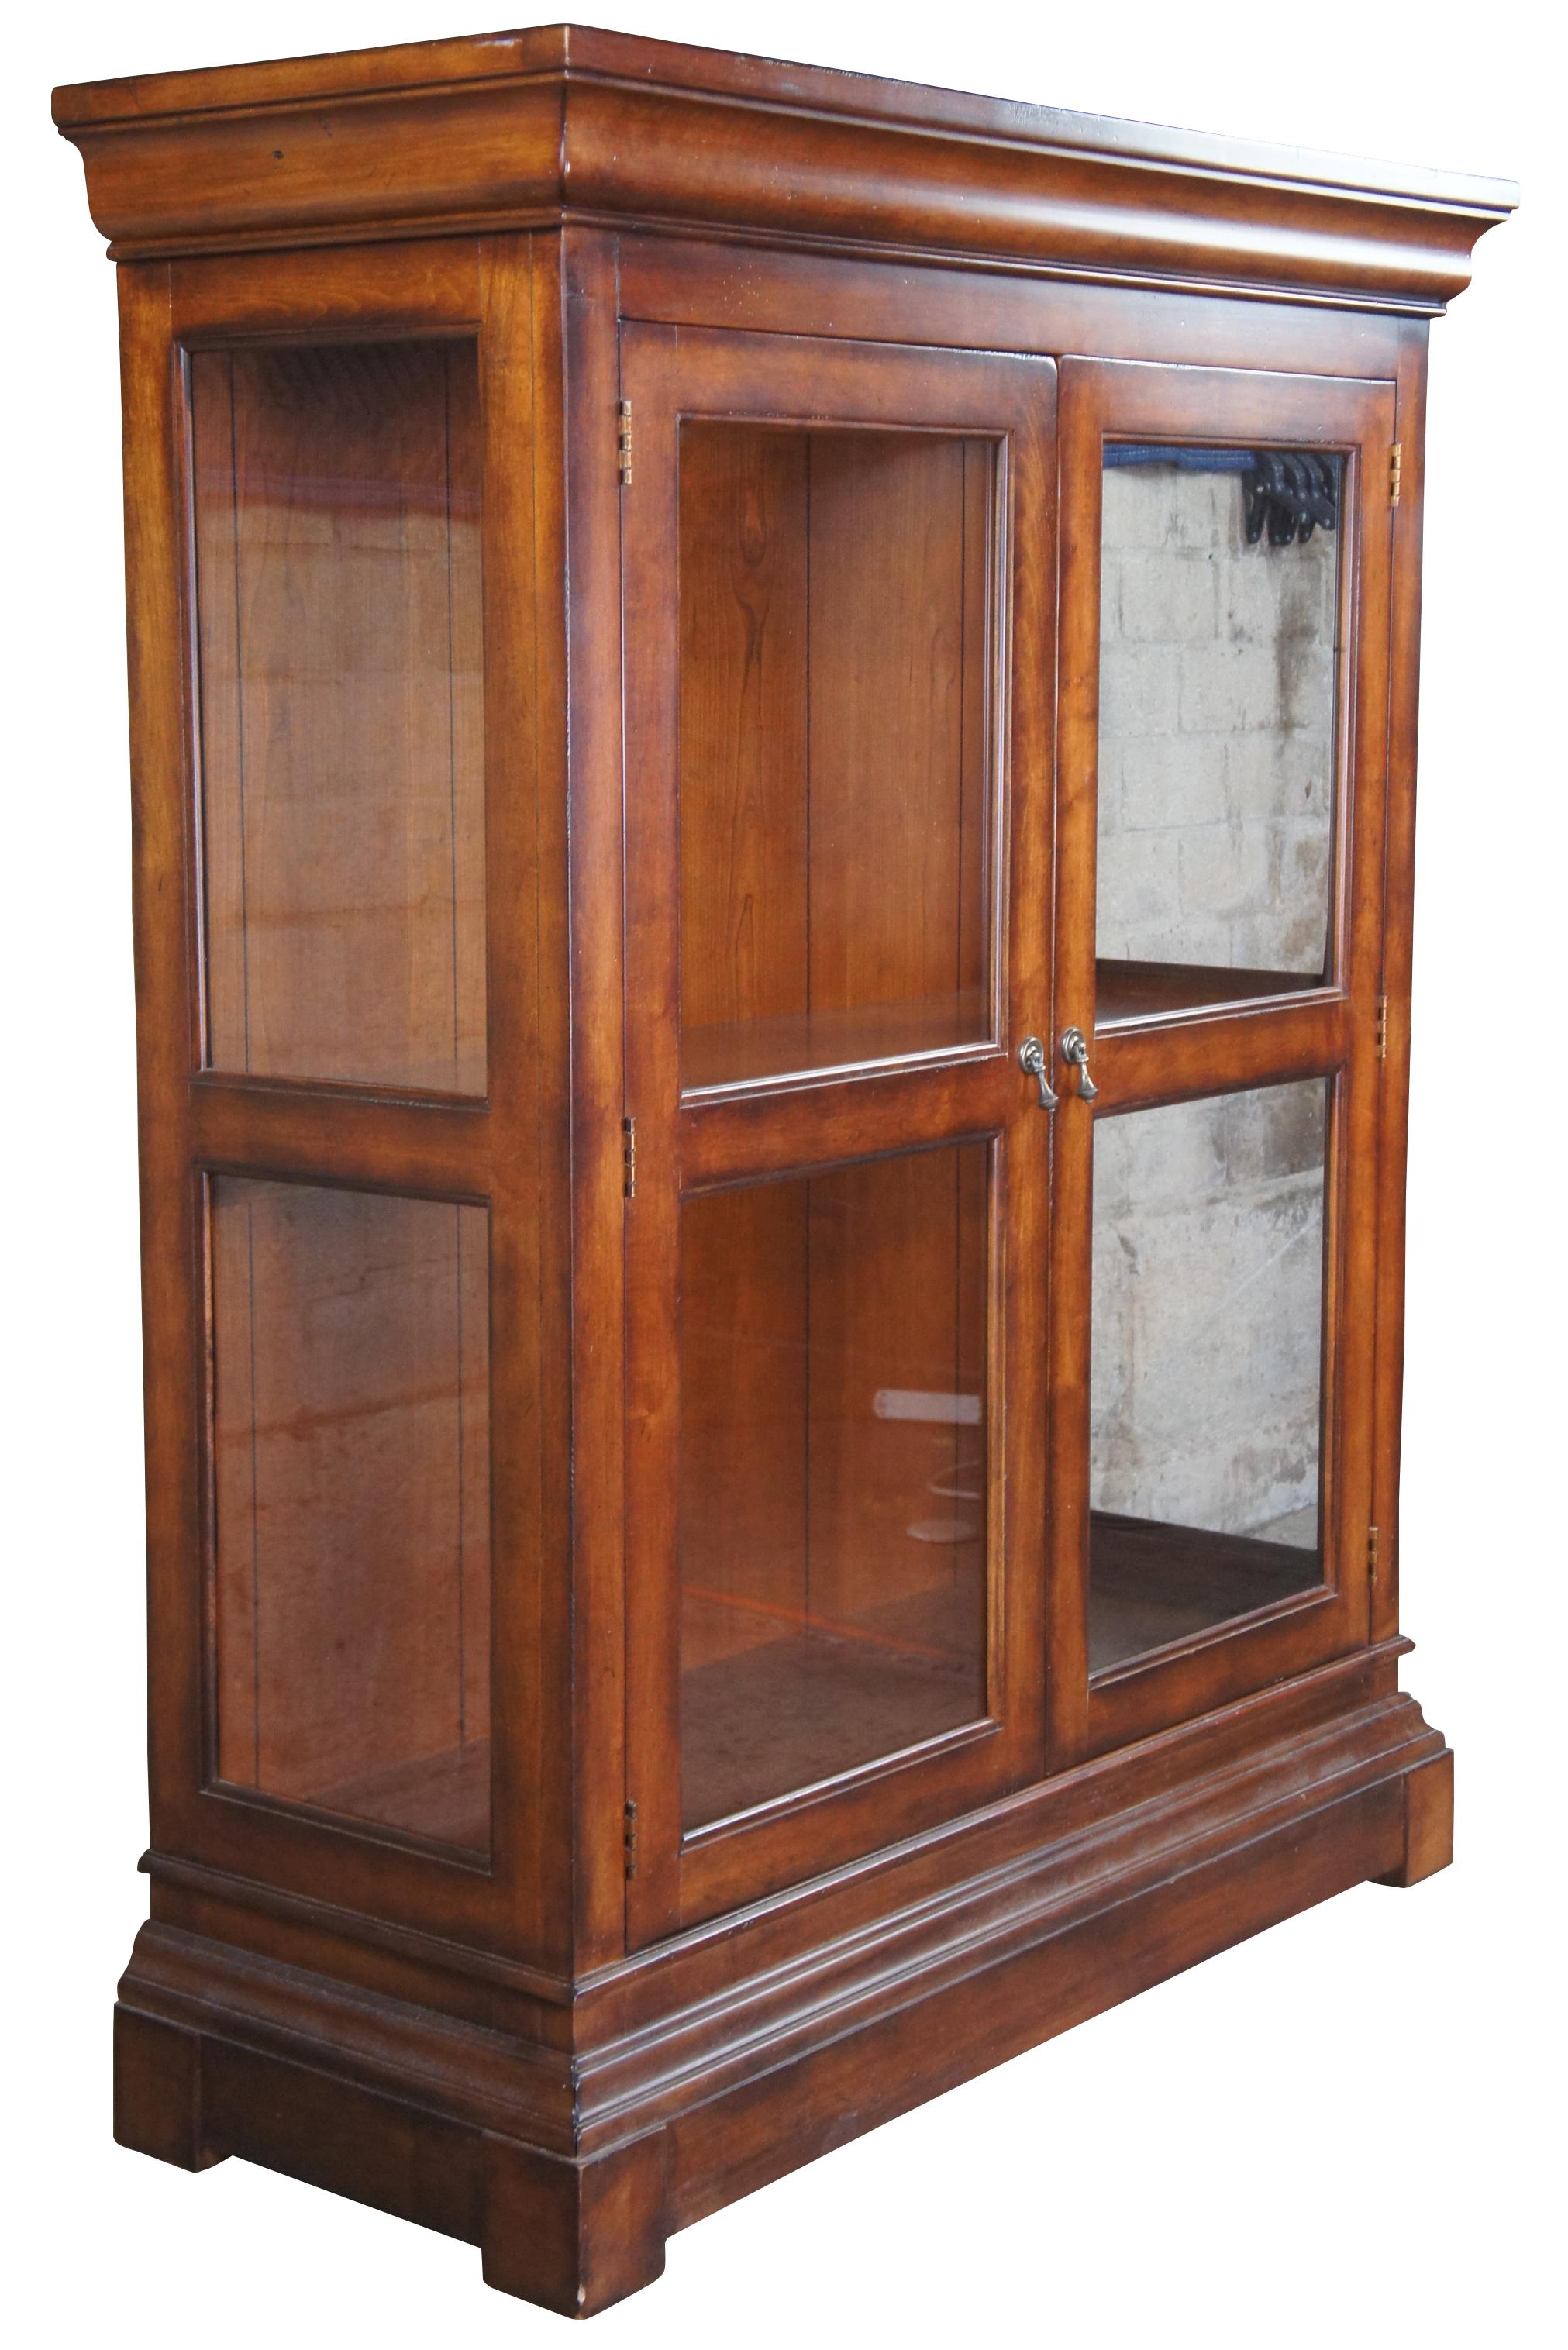 The perfect sized bookcase by Hickory White. Traditional styling in their spice finish. Medium wood tone with one fixed interior shelf. Room for 2 additional shelves. 23351-23. Measure: 56